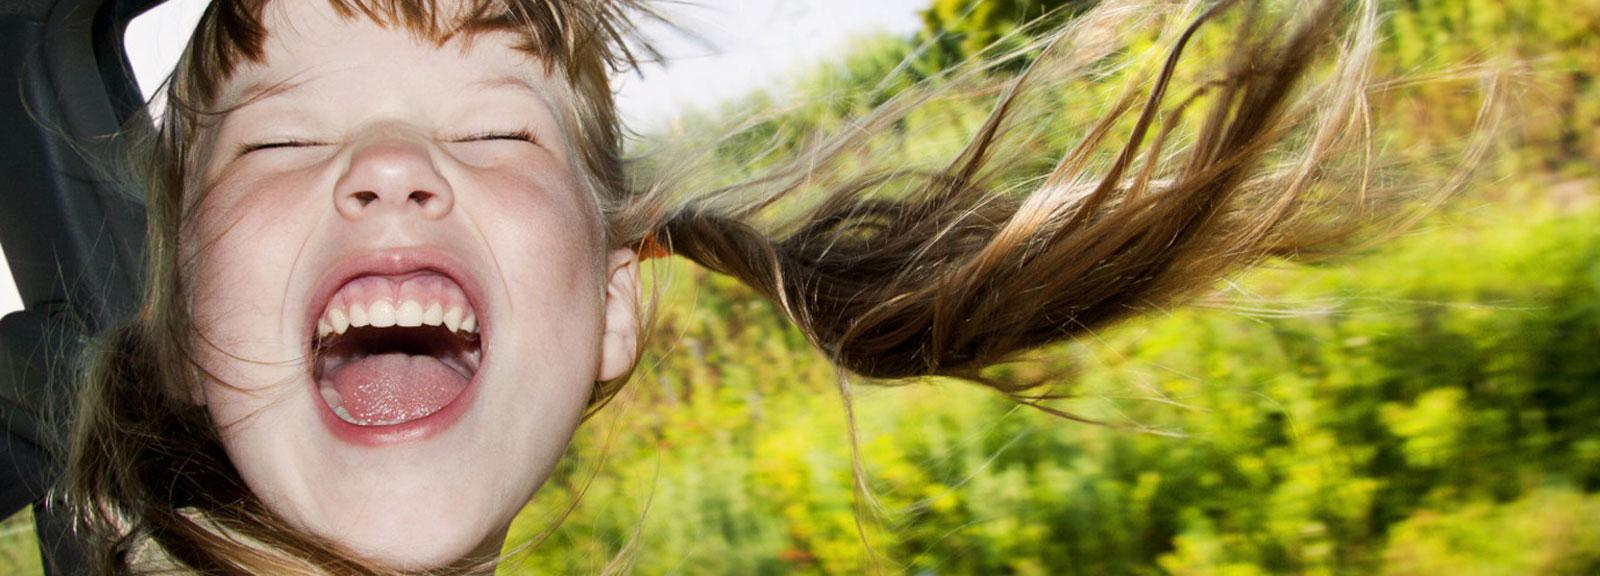 Girl screaming with joy with head out of car window gulping New Zealands fresh air.